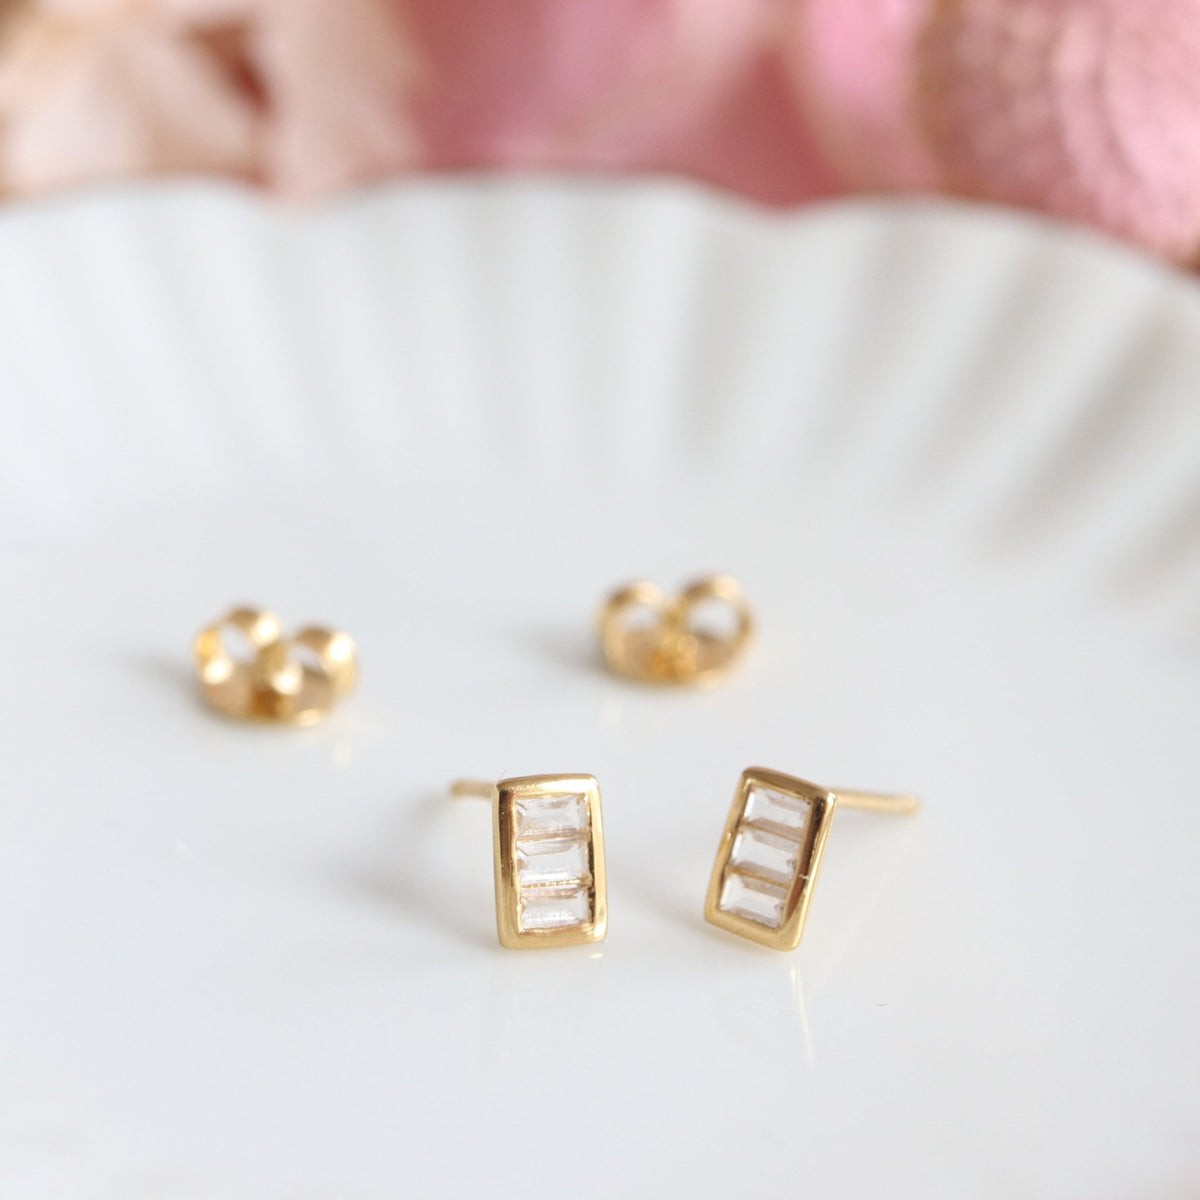 Tiny Loyal Stacked Studs - White Topaz &amp; Silver - SO PRETTY CARA COTTER